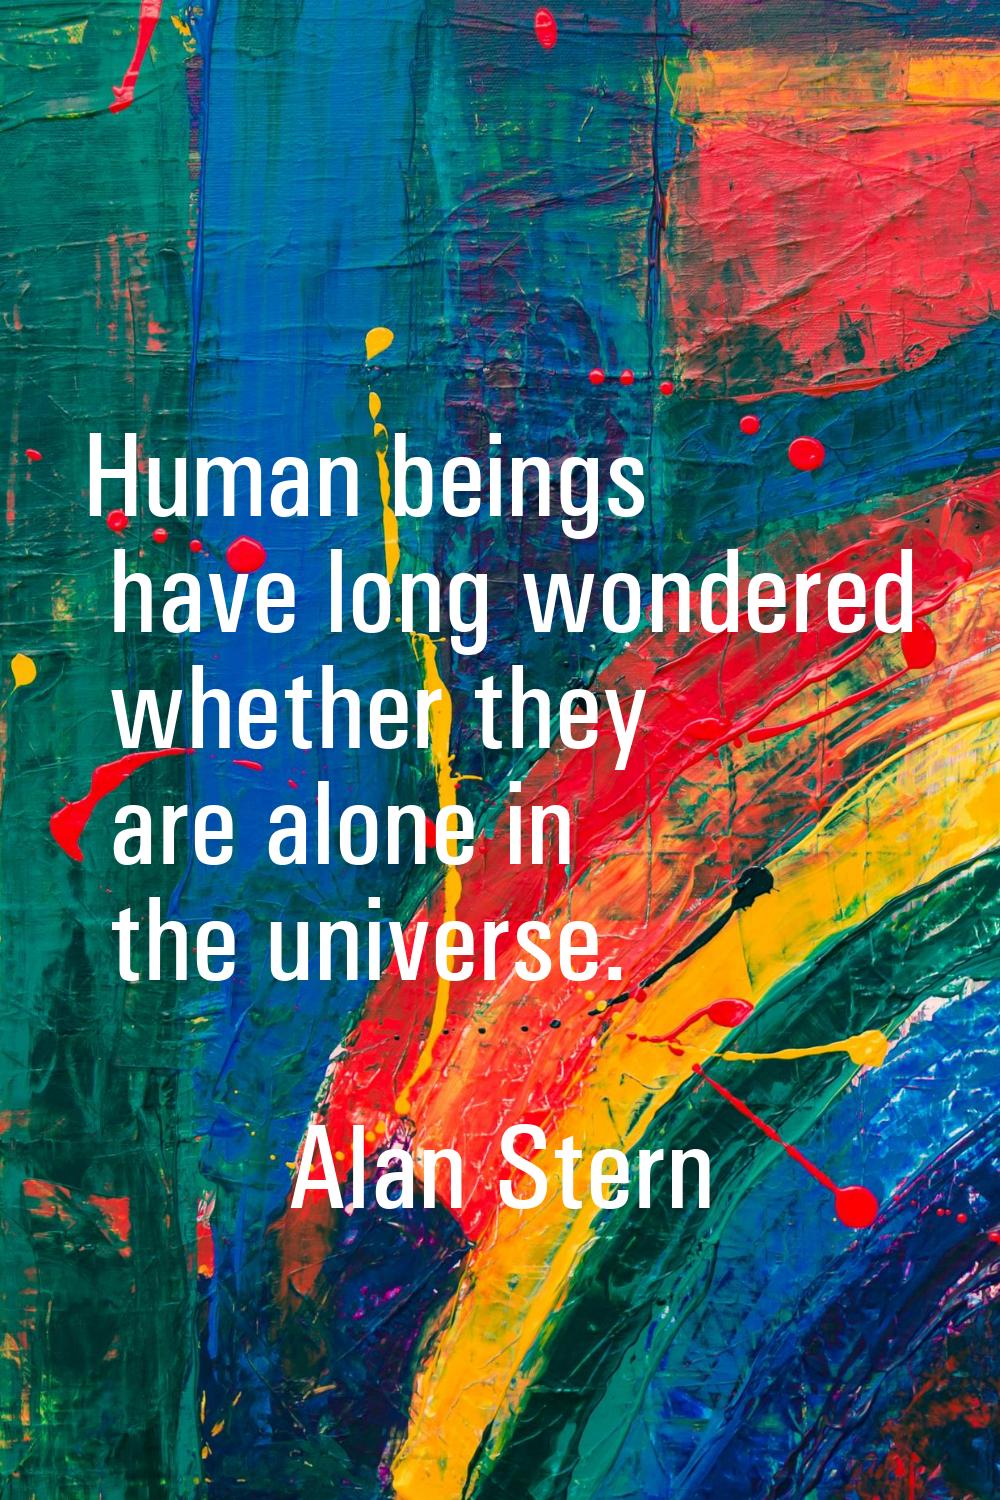 Human beings have long wondered whether they are alone in the universe.